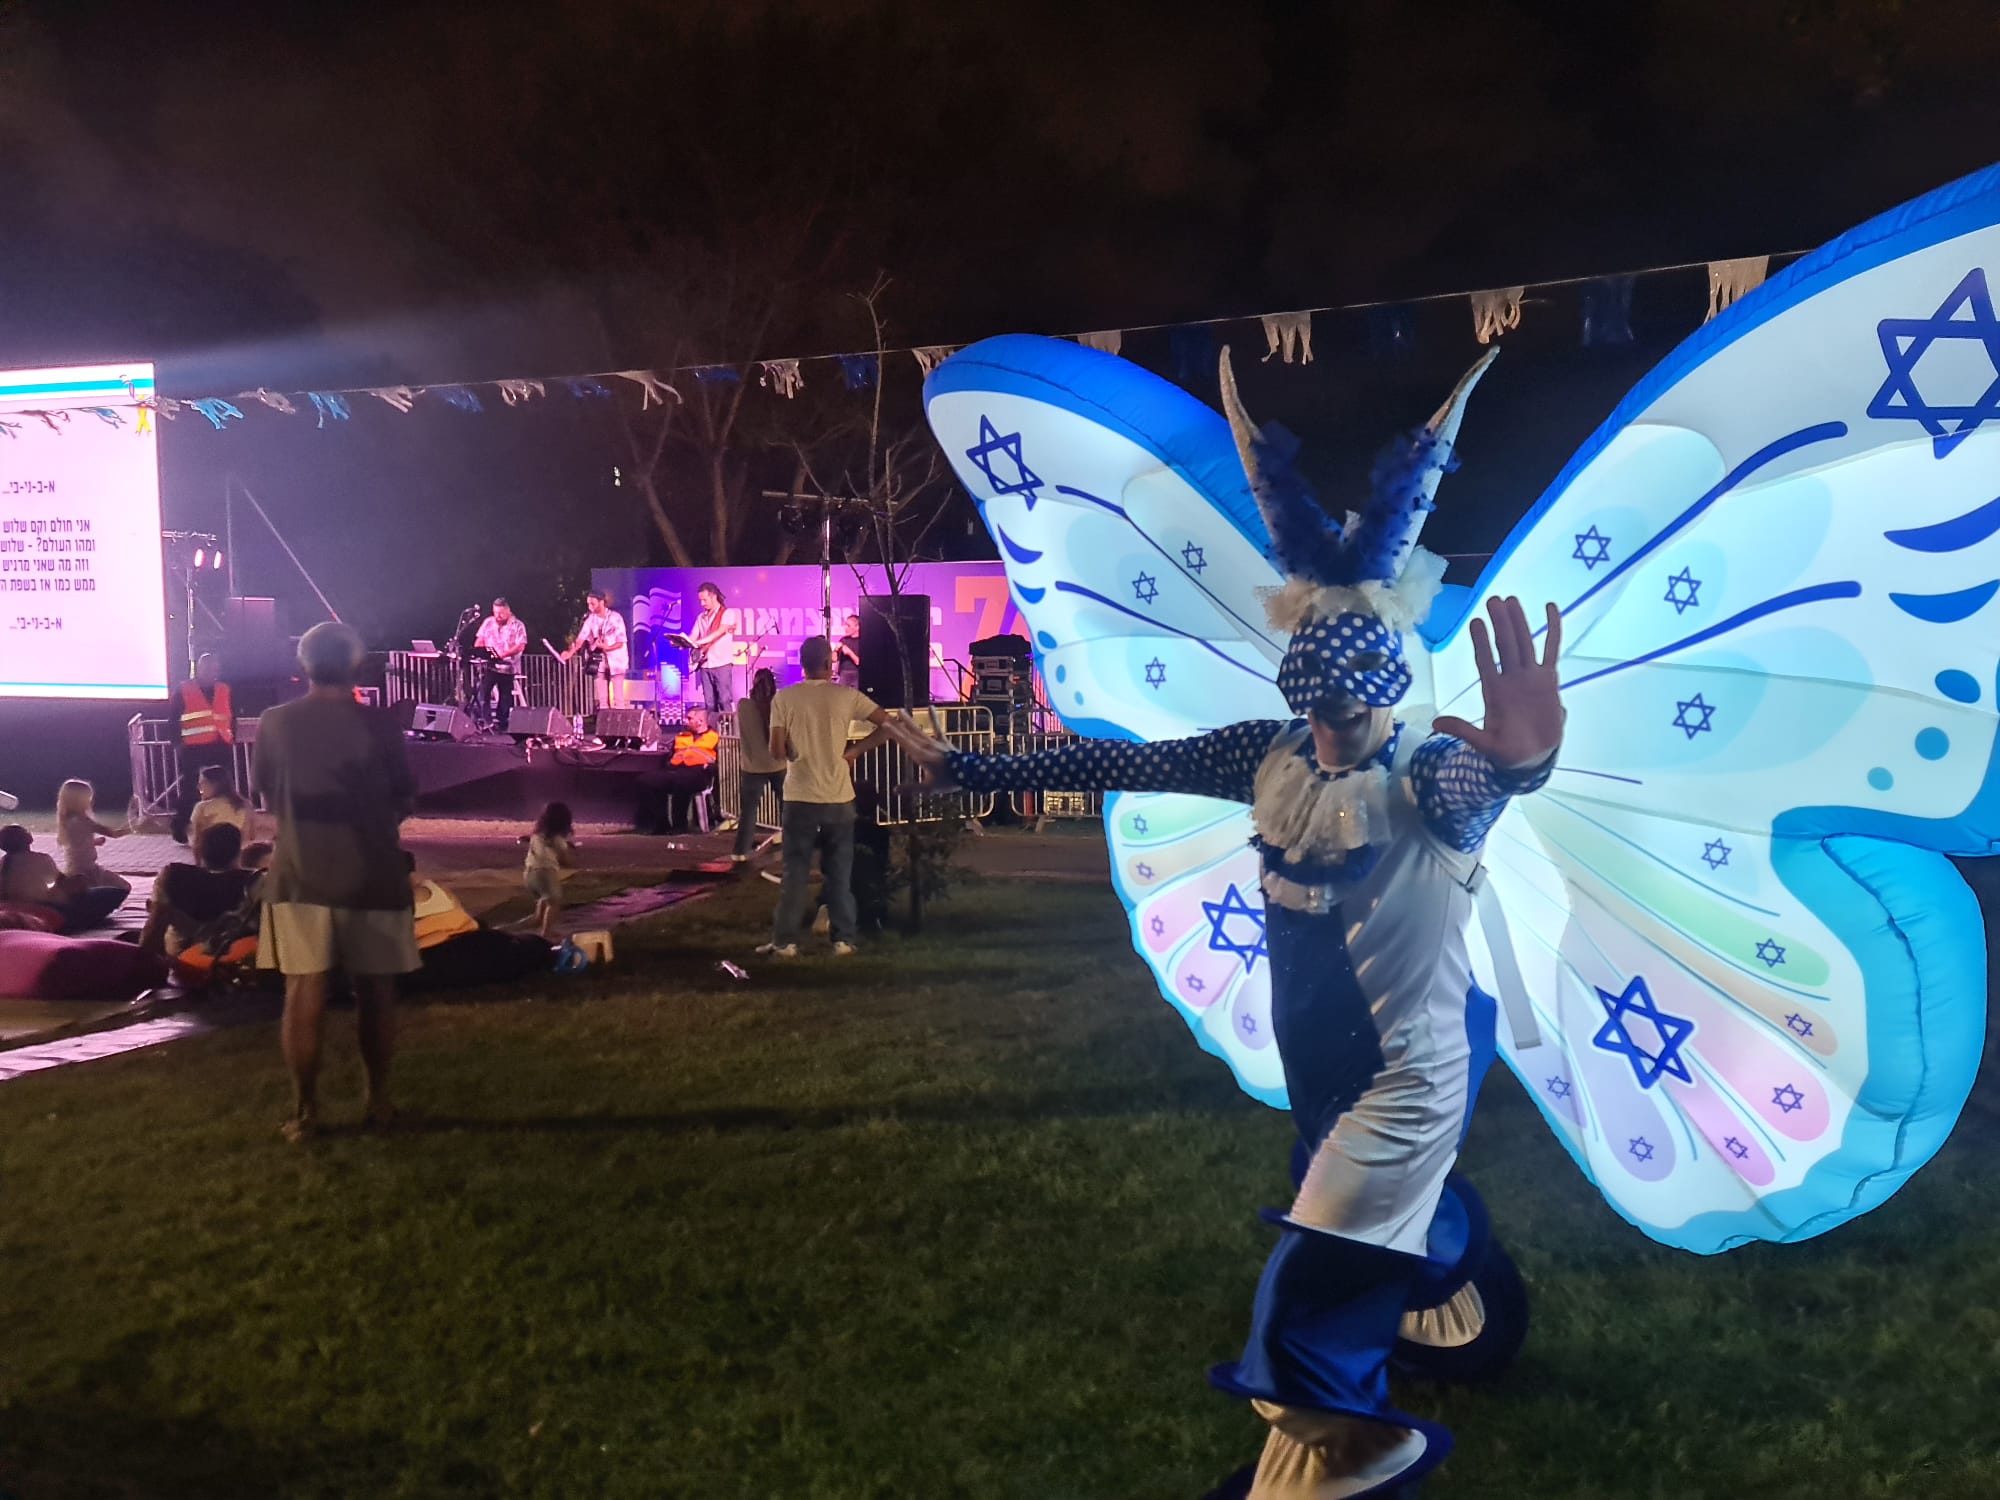 ‘I just can’t do it this year’: Amid war and infighting, many Israelis hit pause on Independence Day festivities